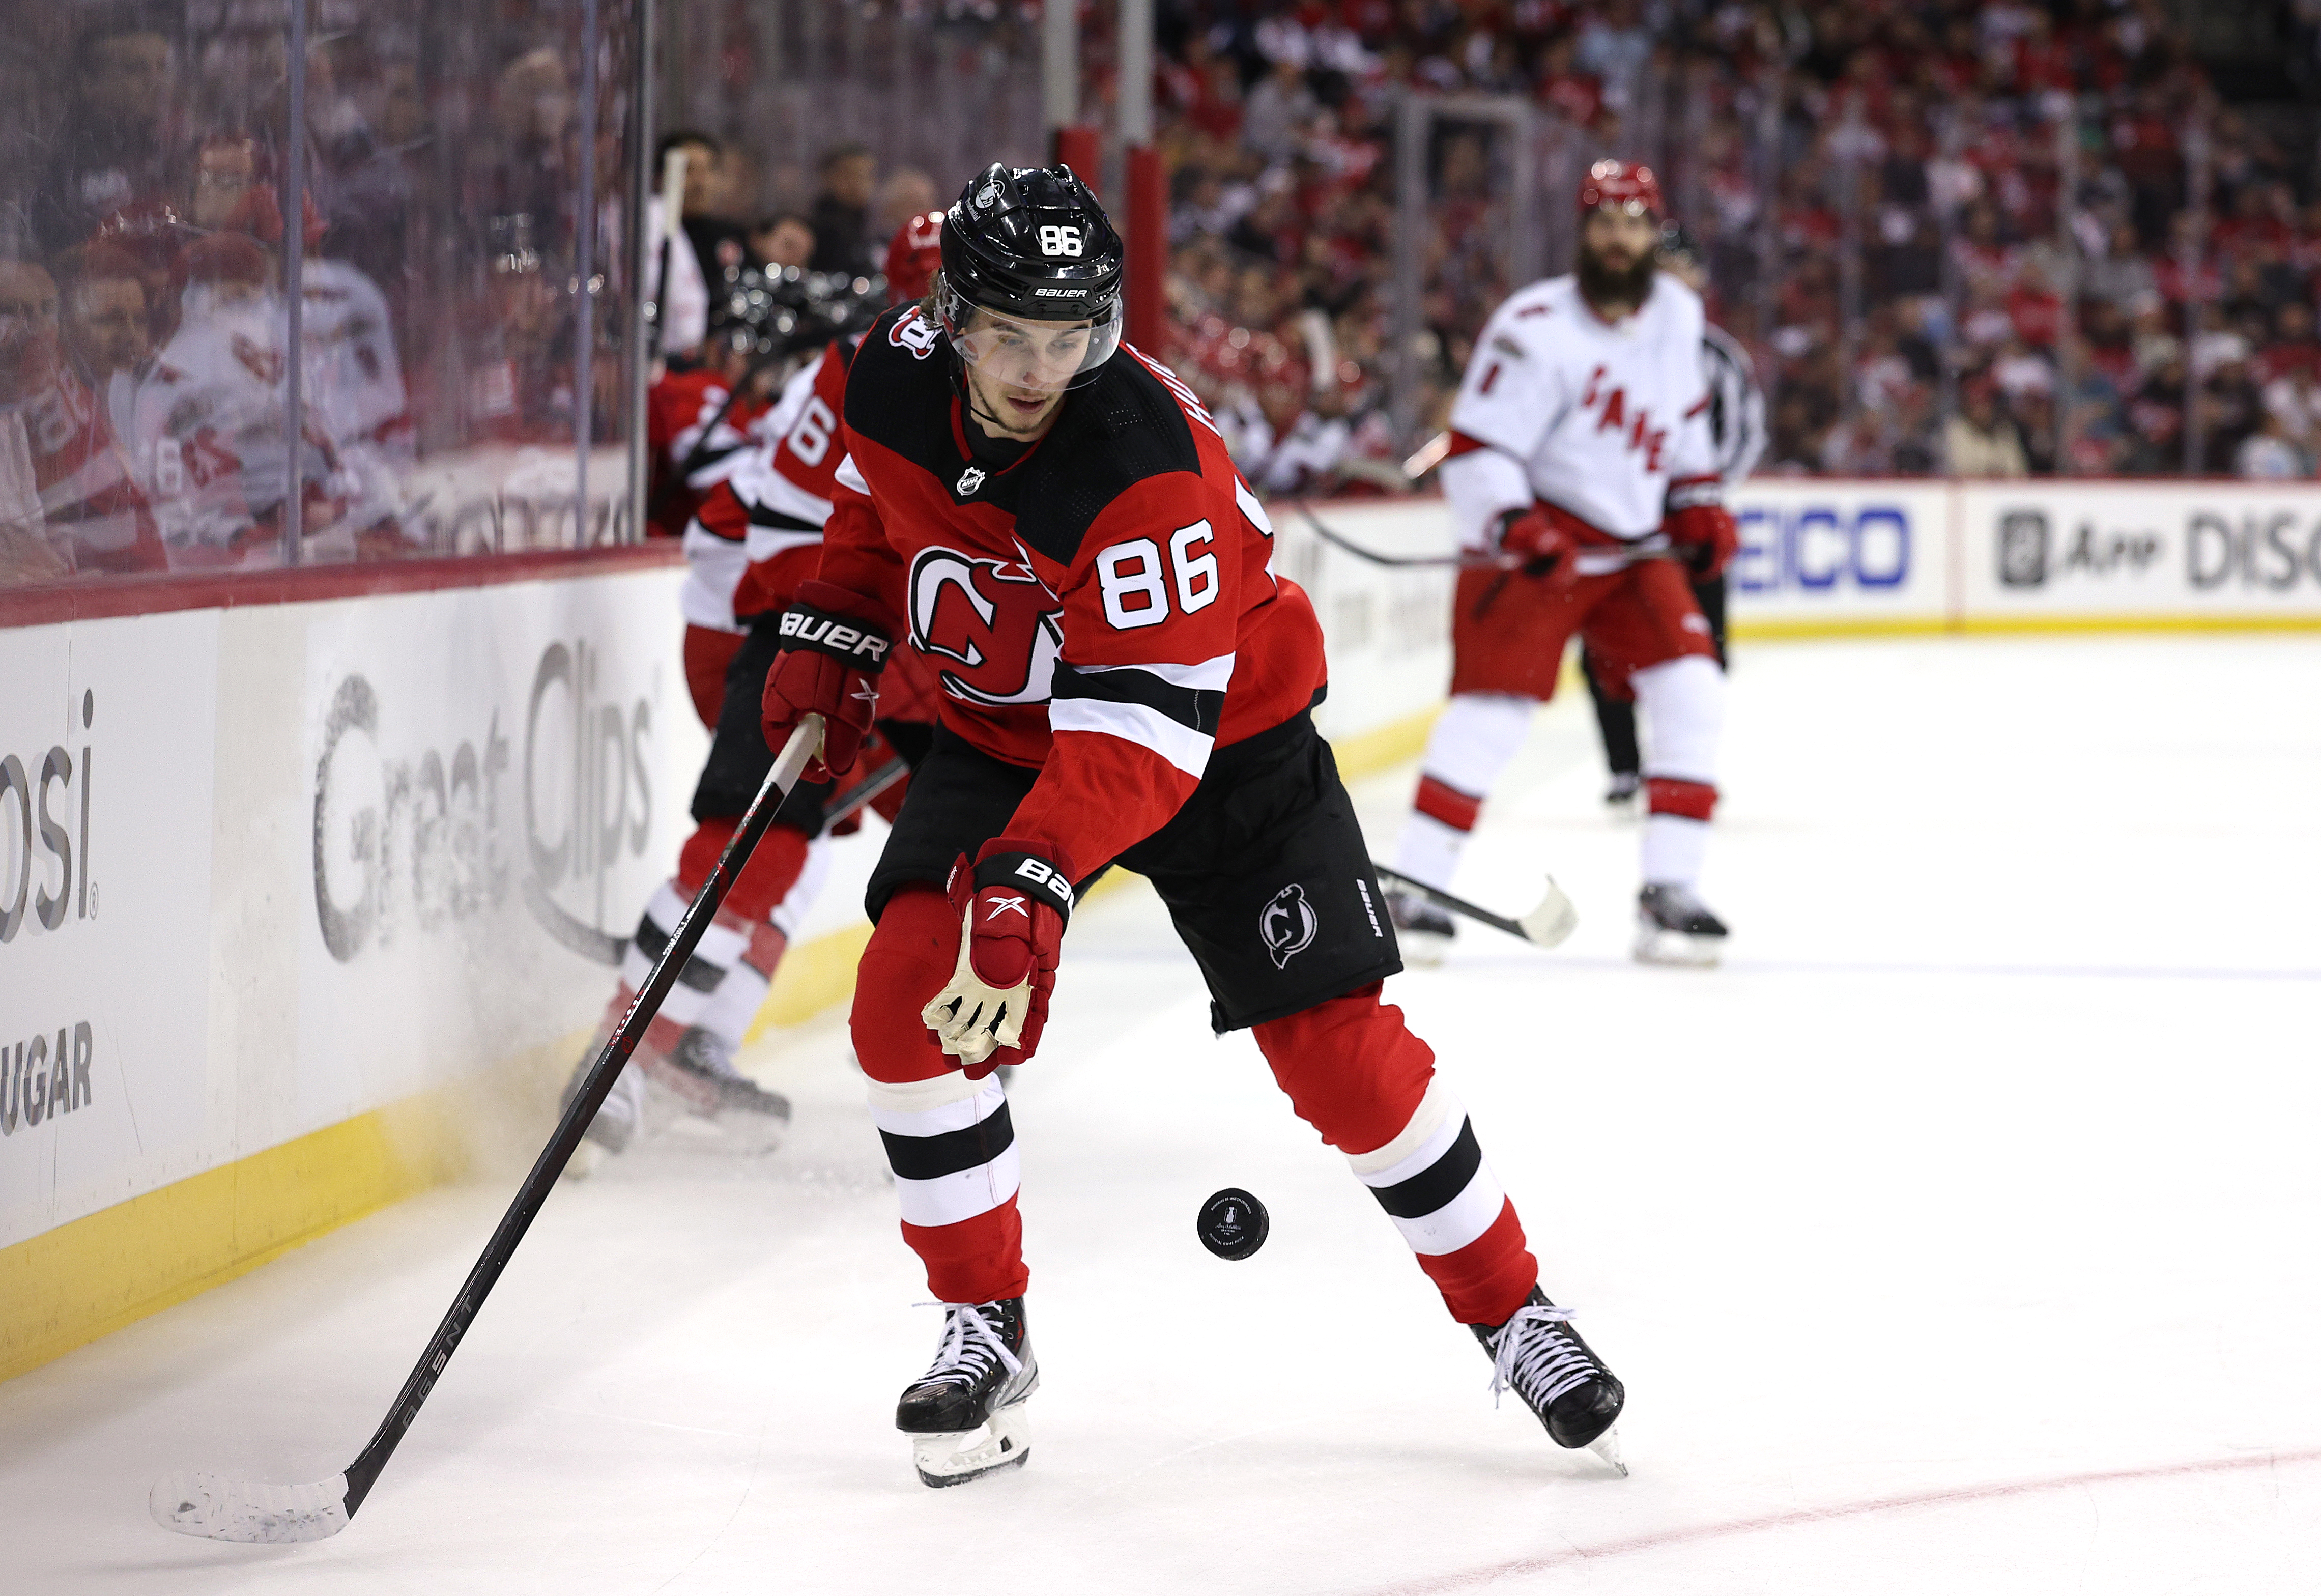 How to Watch the Hurricanes vs. Devils Game: Streaming & TV Info